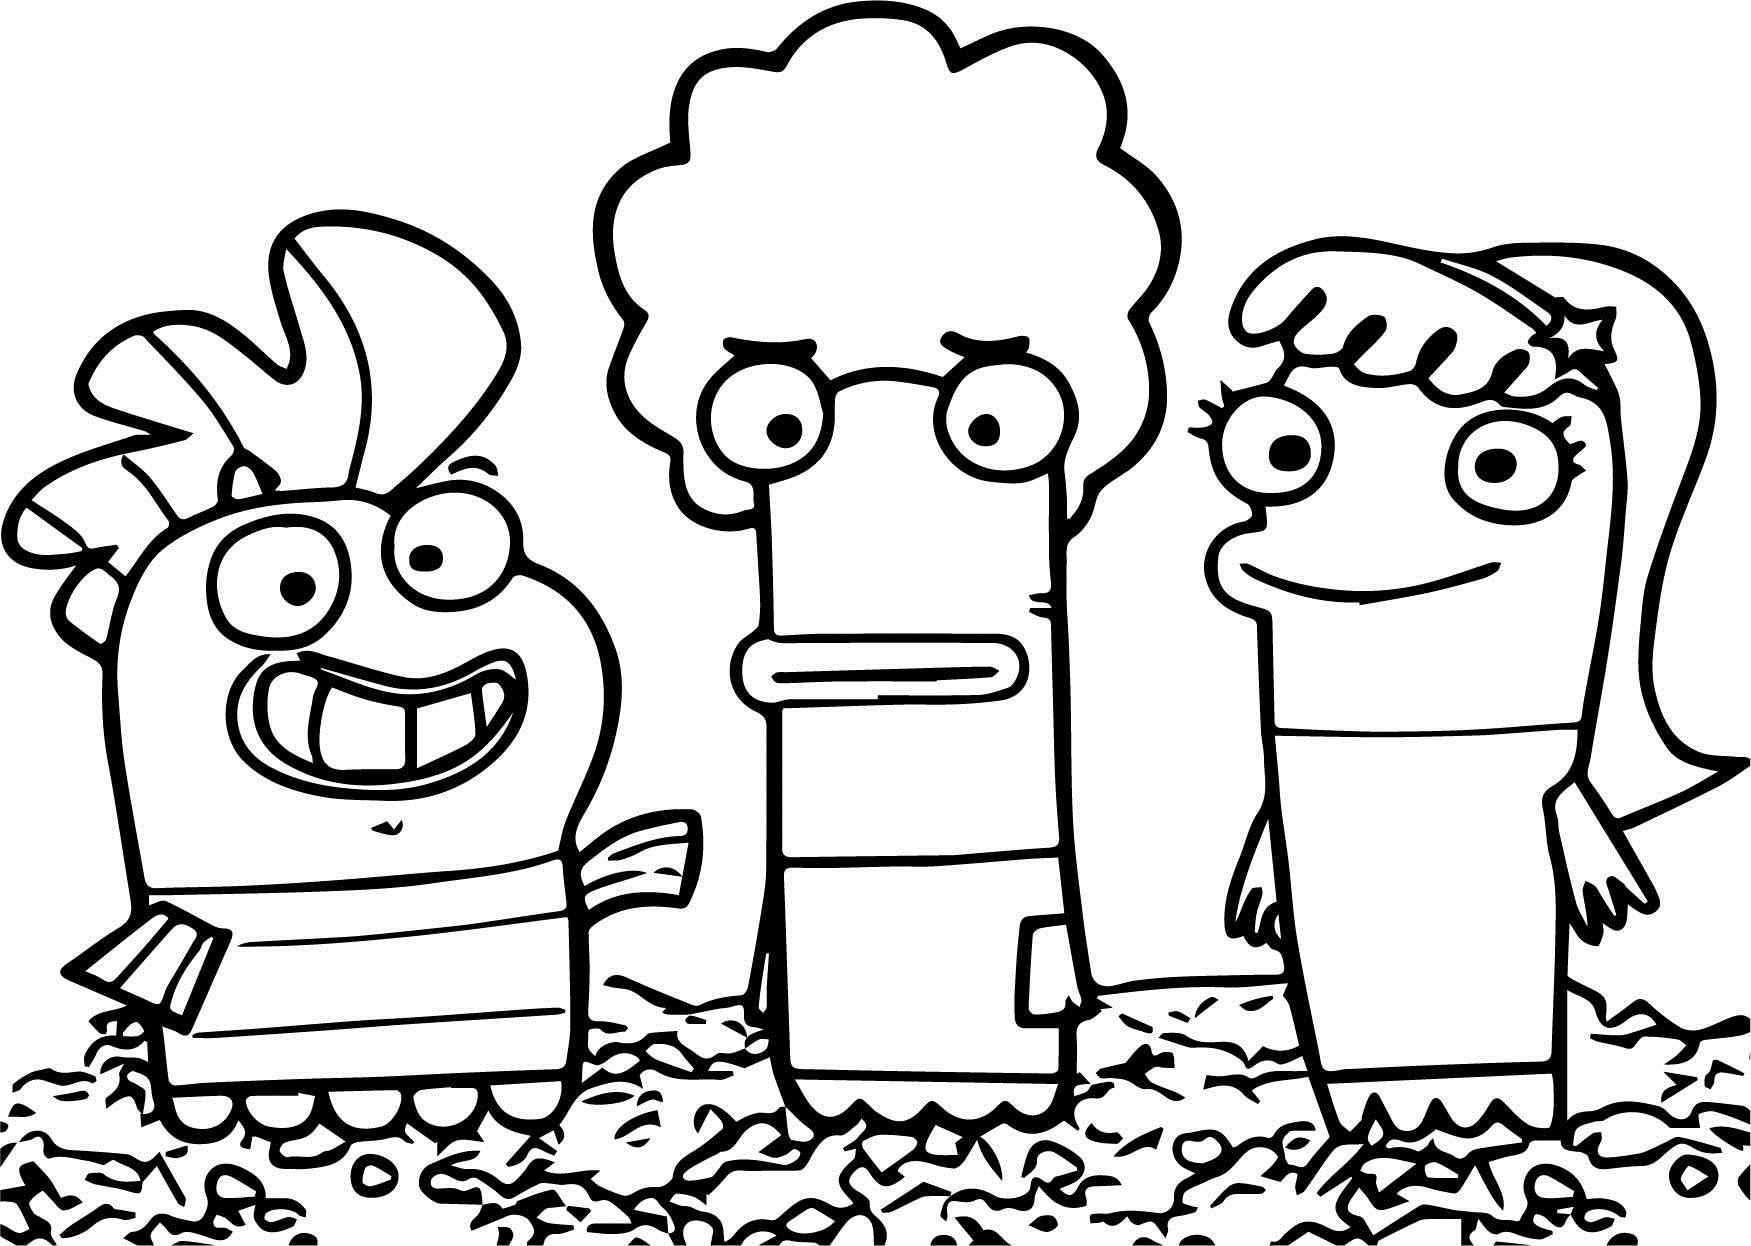 Fish Hooks Coloring Pages - Free Printable Coloring Pages for Kids